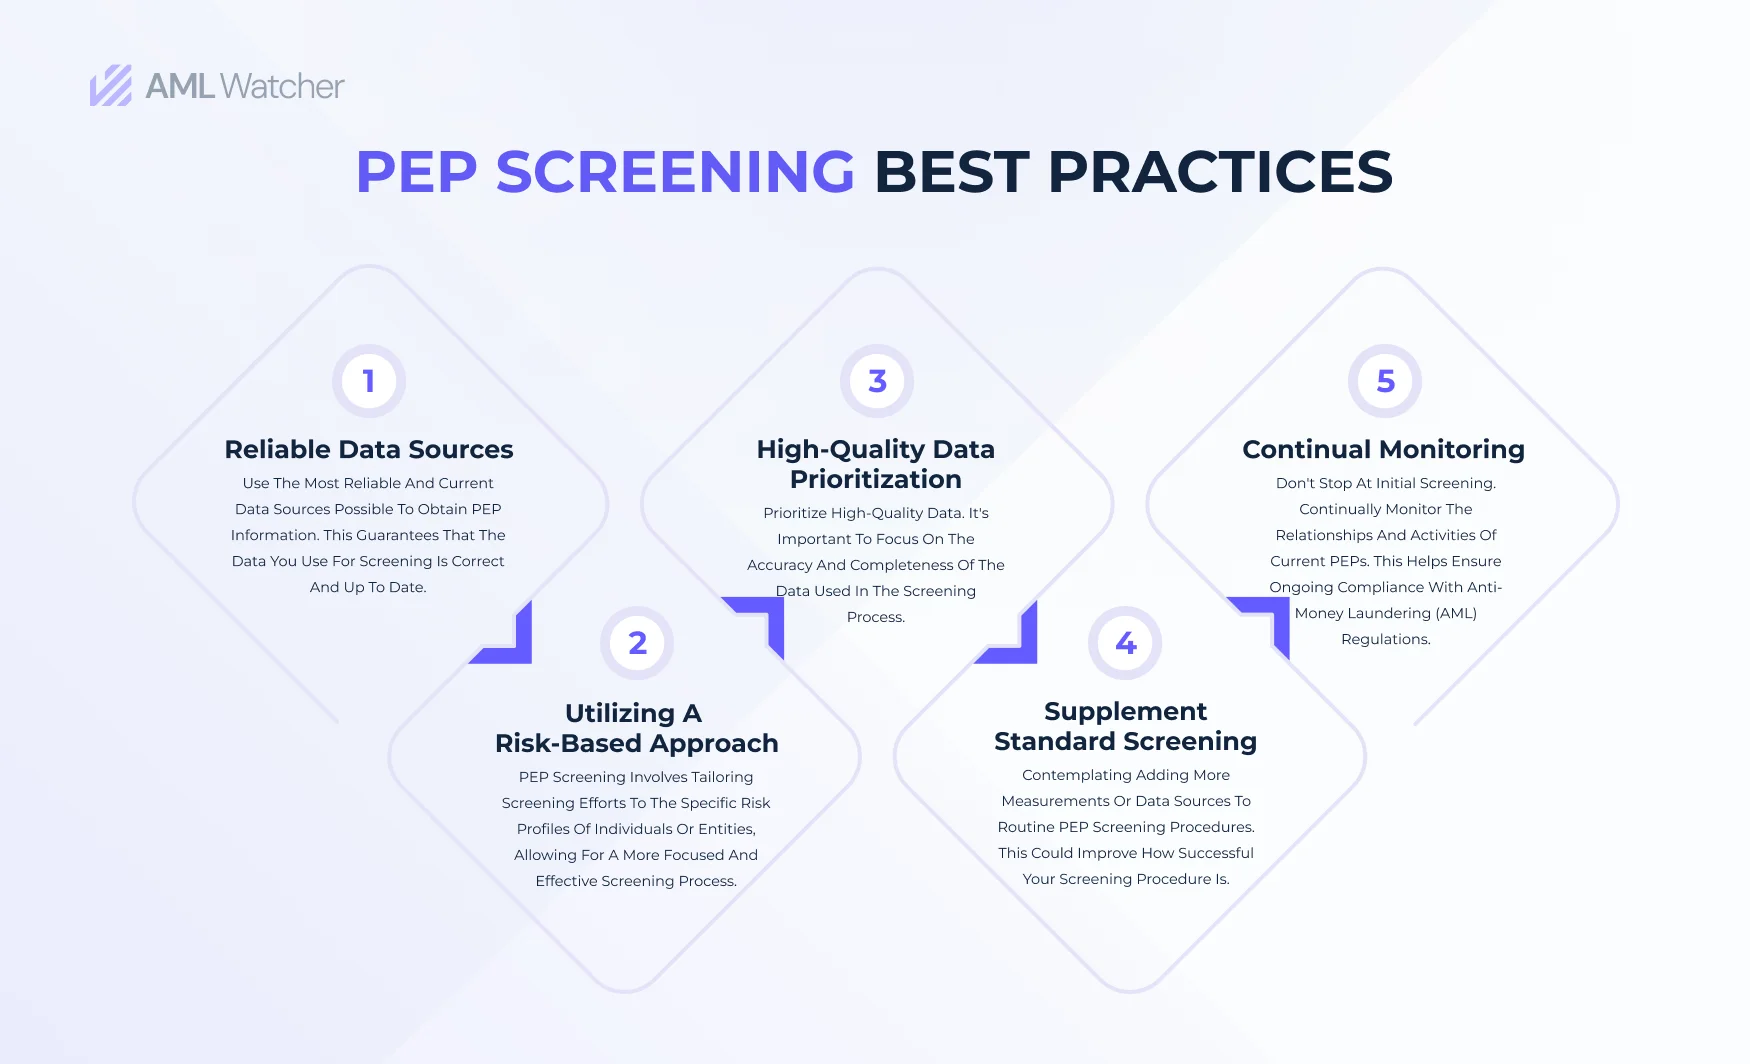  Infographic explaining the best practices that must be adopted in PEP screening 